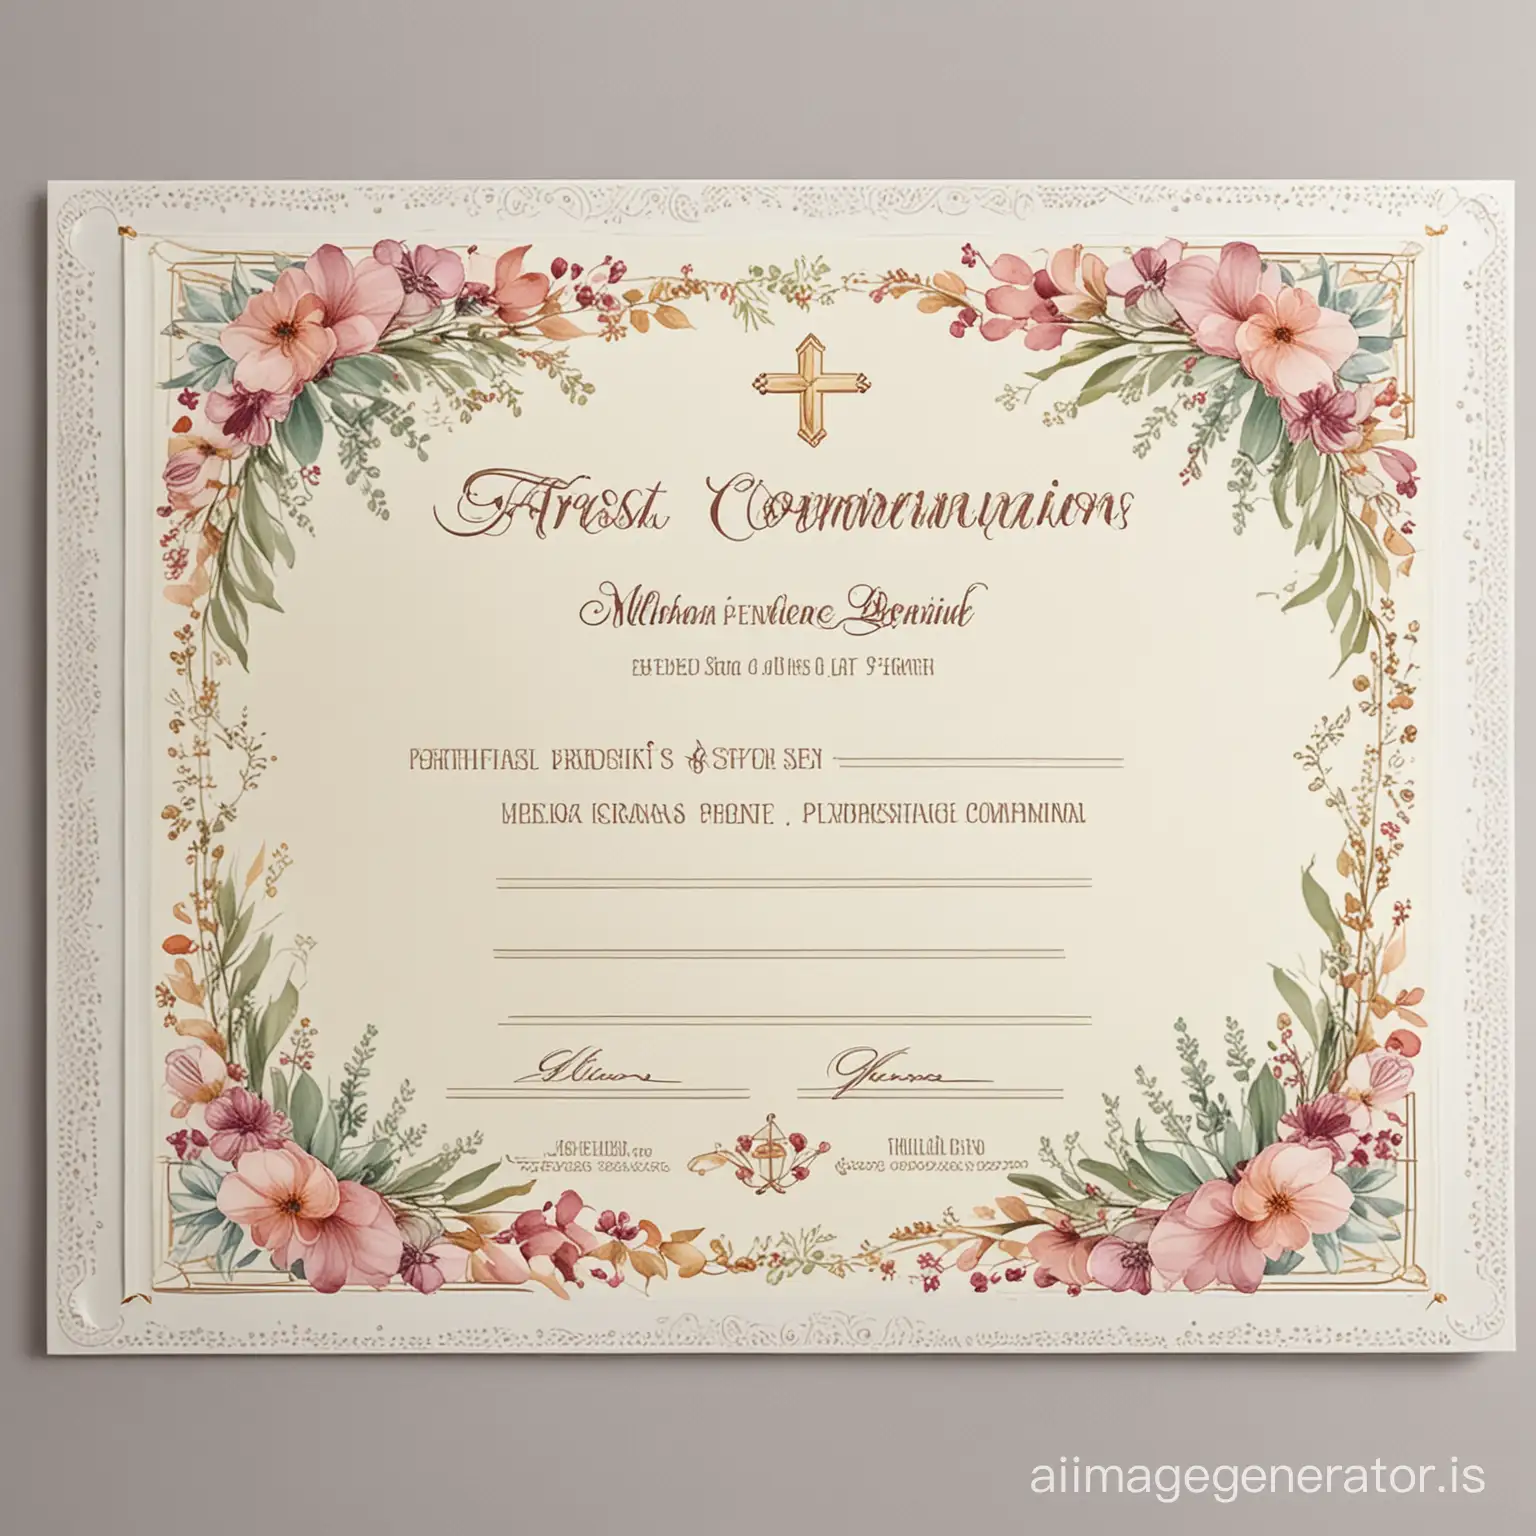 Floral-Design-First-Communion-Certificate-with-Geometrical-Borders